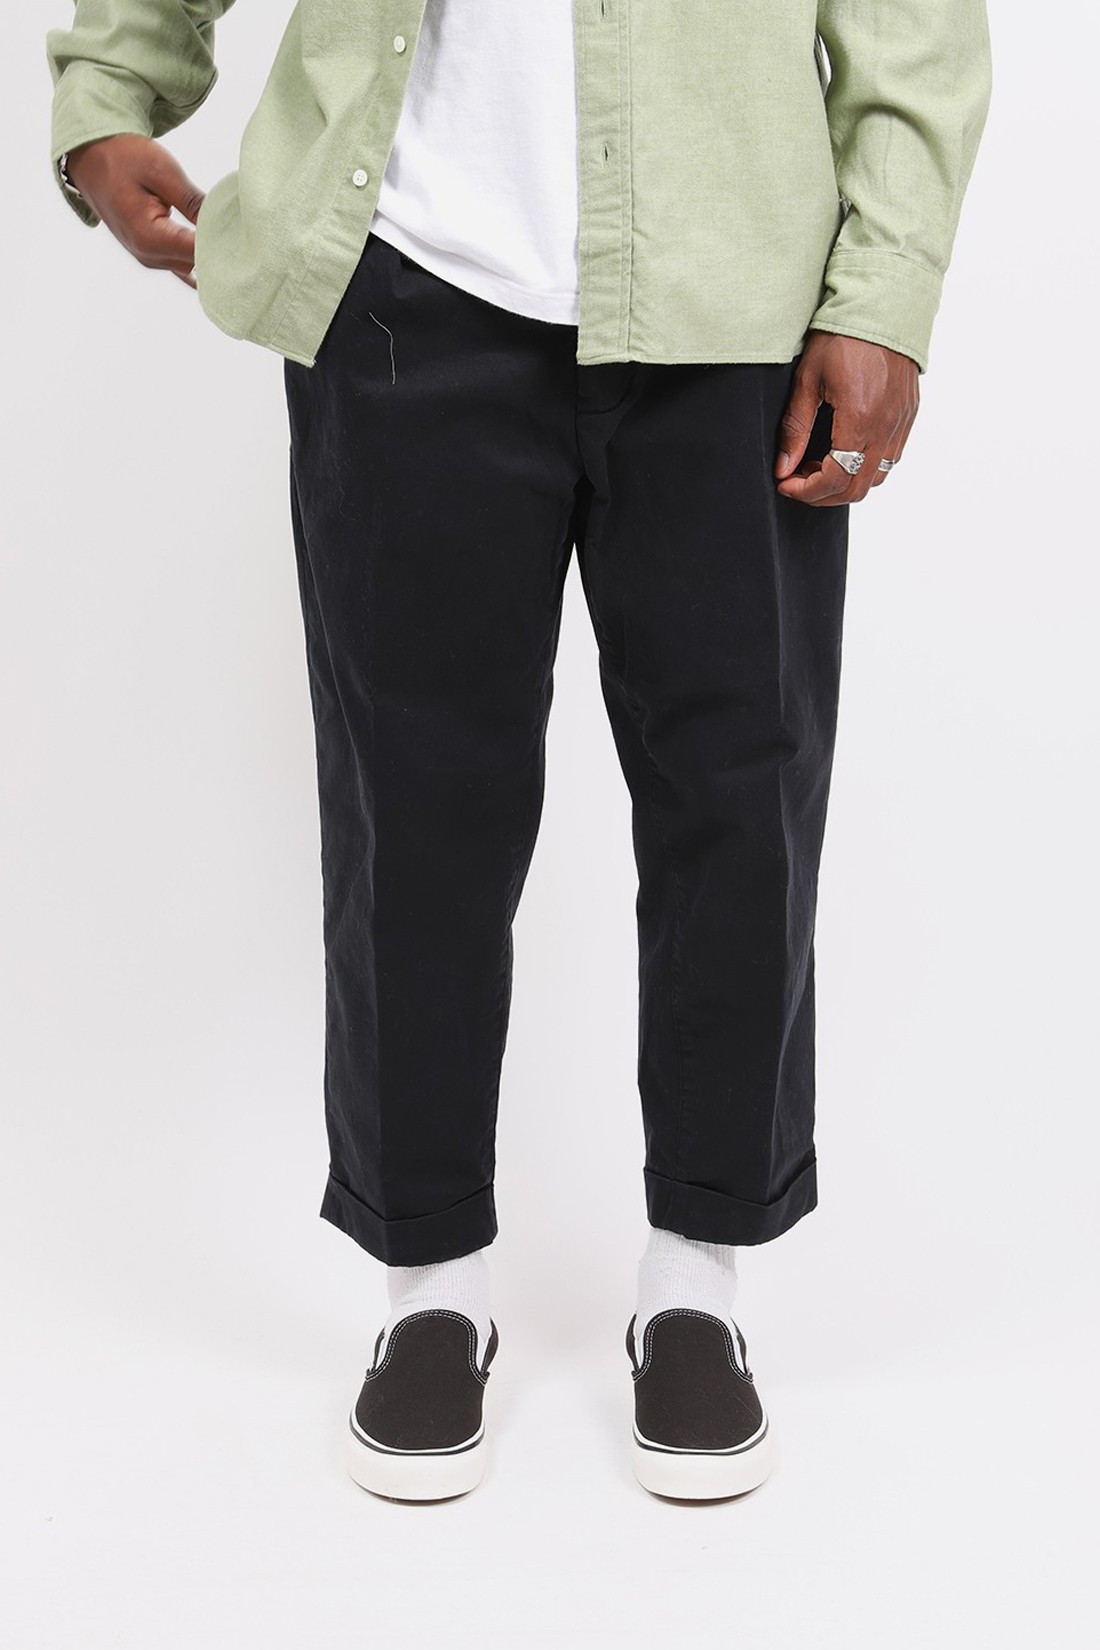 Beams Plus 2 Pleat Chinos - Well Spent. | Chinos, Pleat, Mens outfits